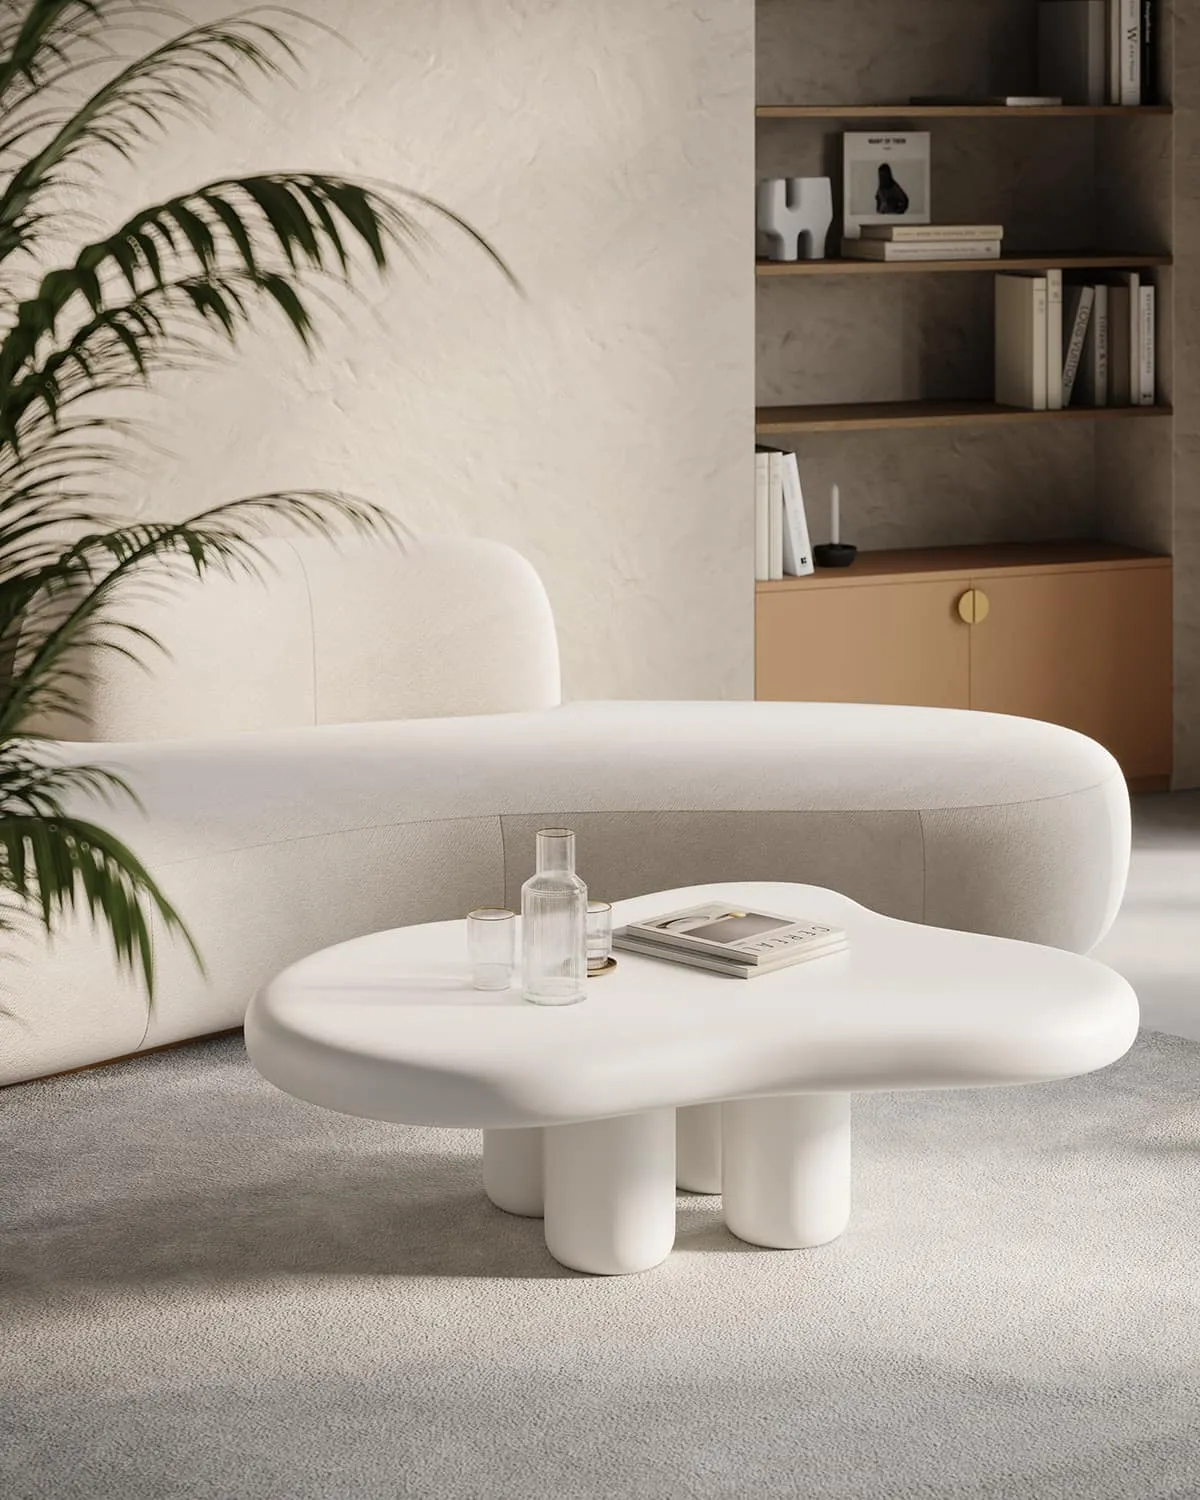 all white and stone free-form centre piece in a living room, with white marble floor, white sofa, white walls, wooden bookshelf, books, plant beside the sofa